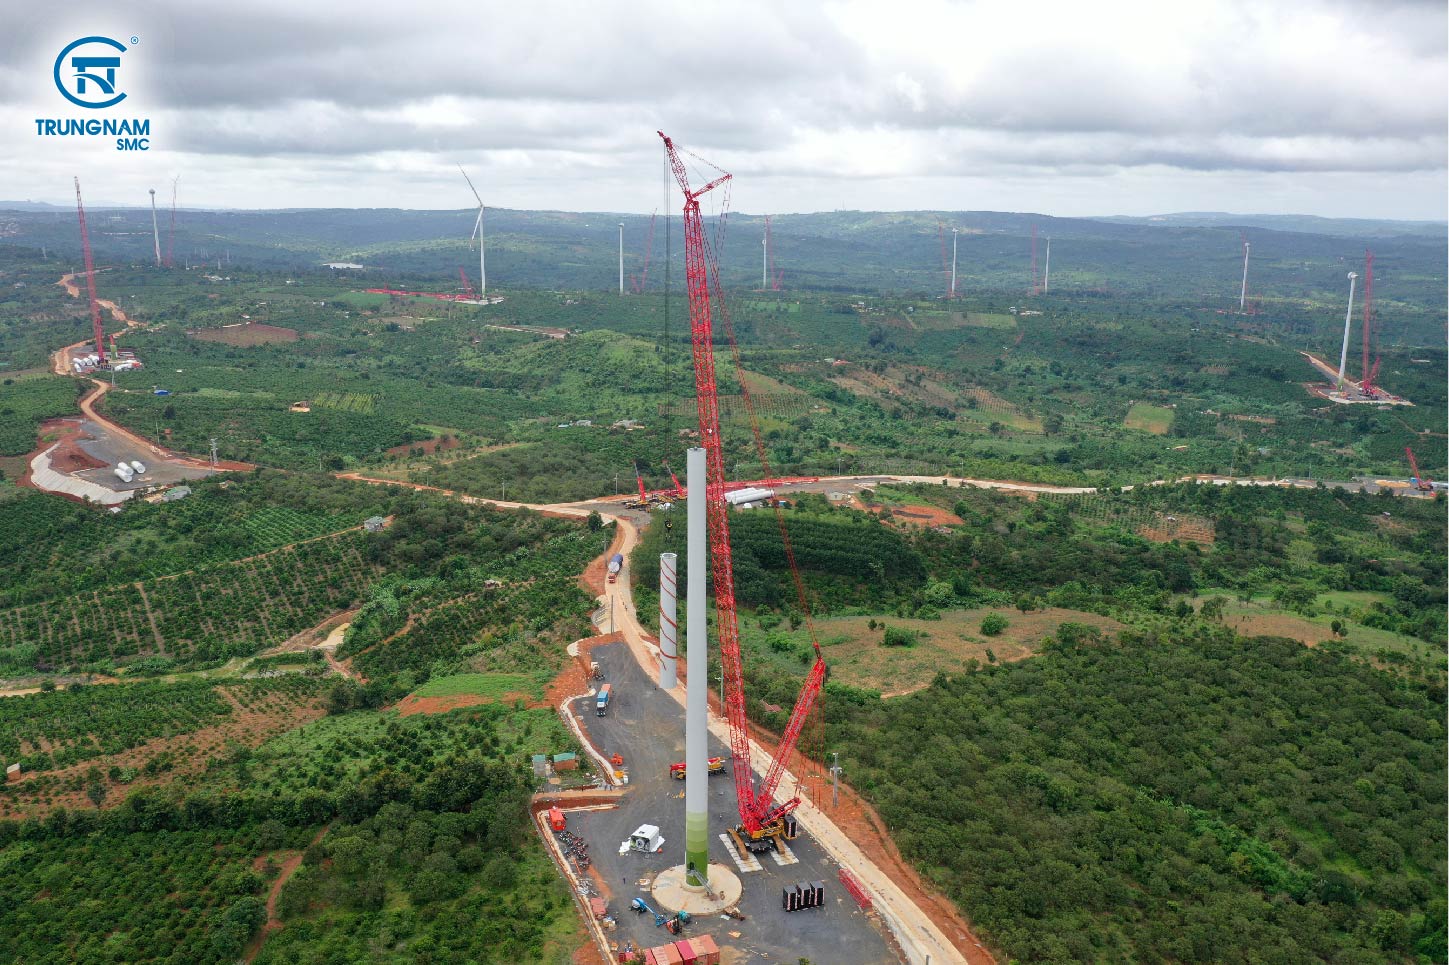 Supplying large-capacity crawler cranes for the construction and installation of wind turbines